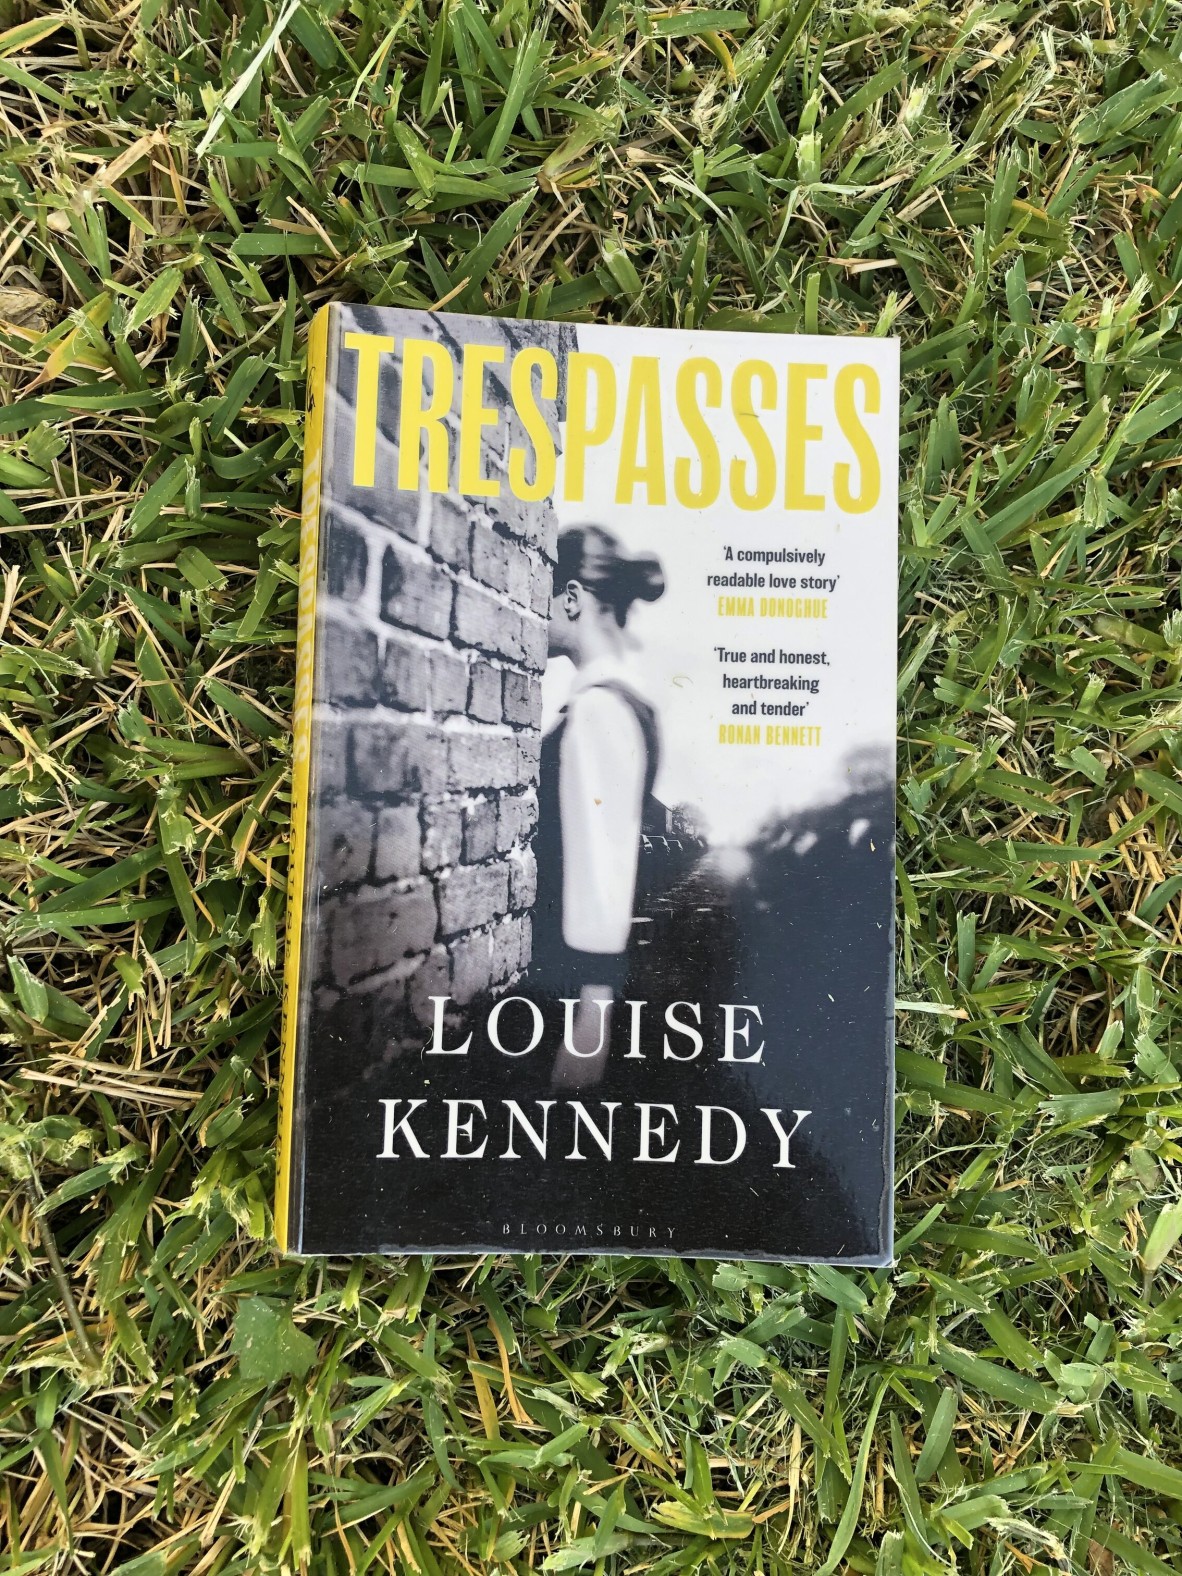 A copy of the book Trespasses by Louise Kennedy sits on a green lawn